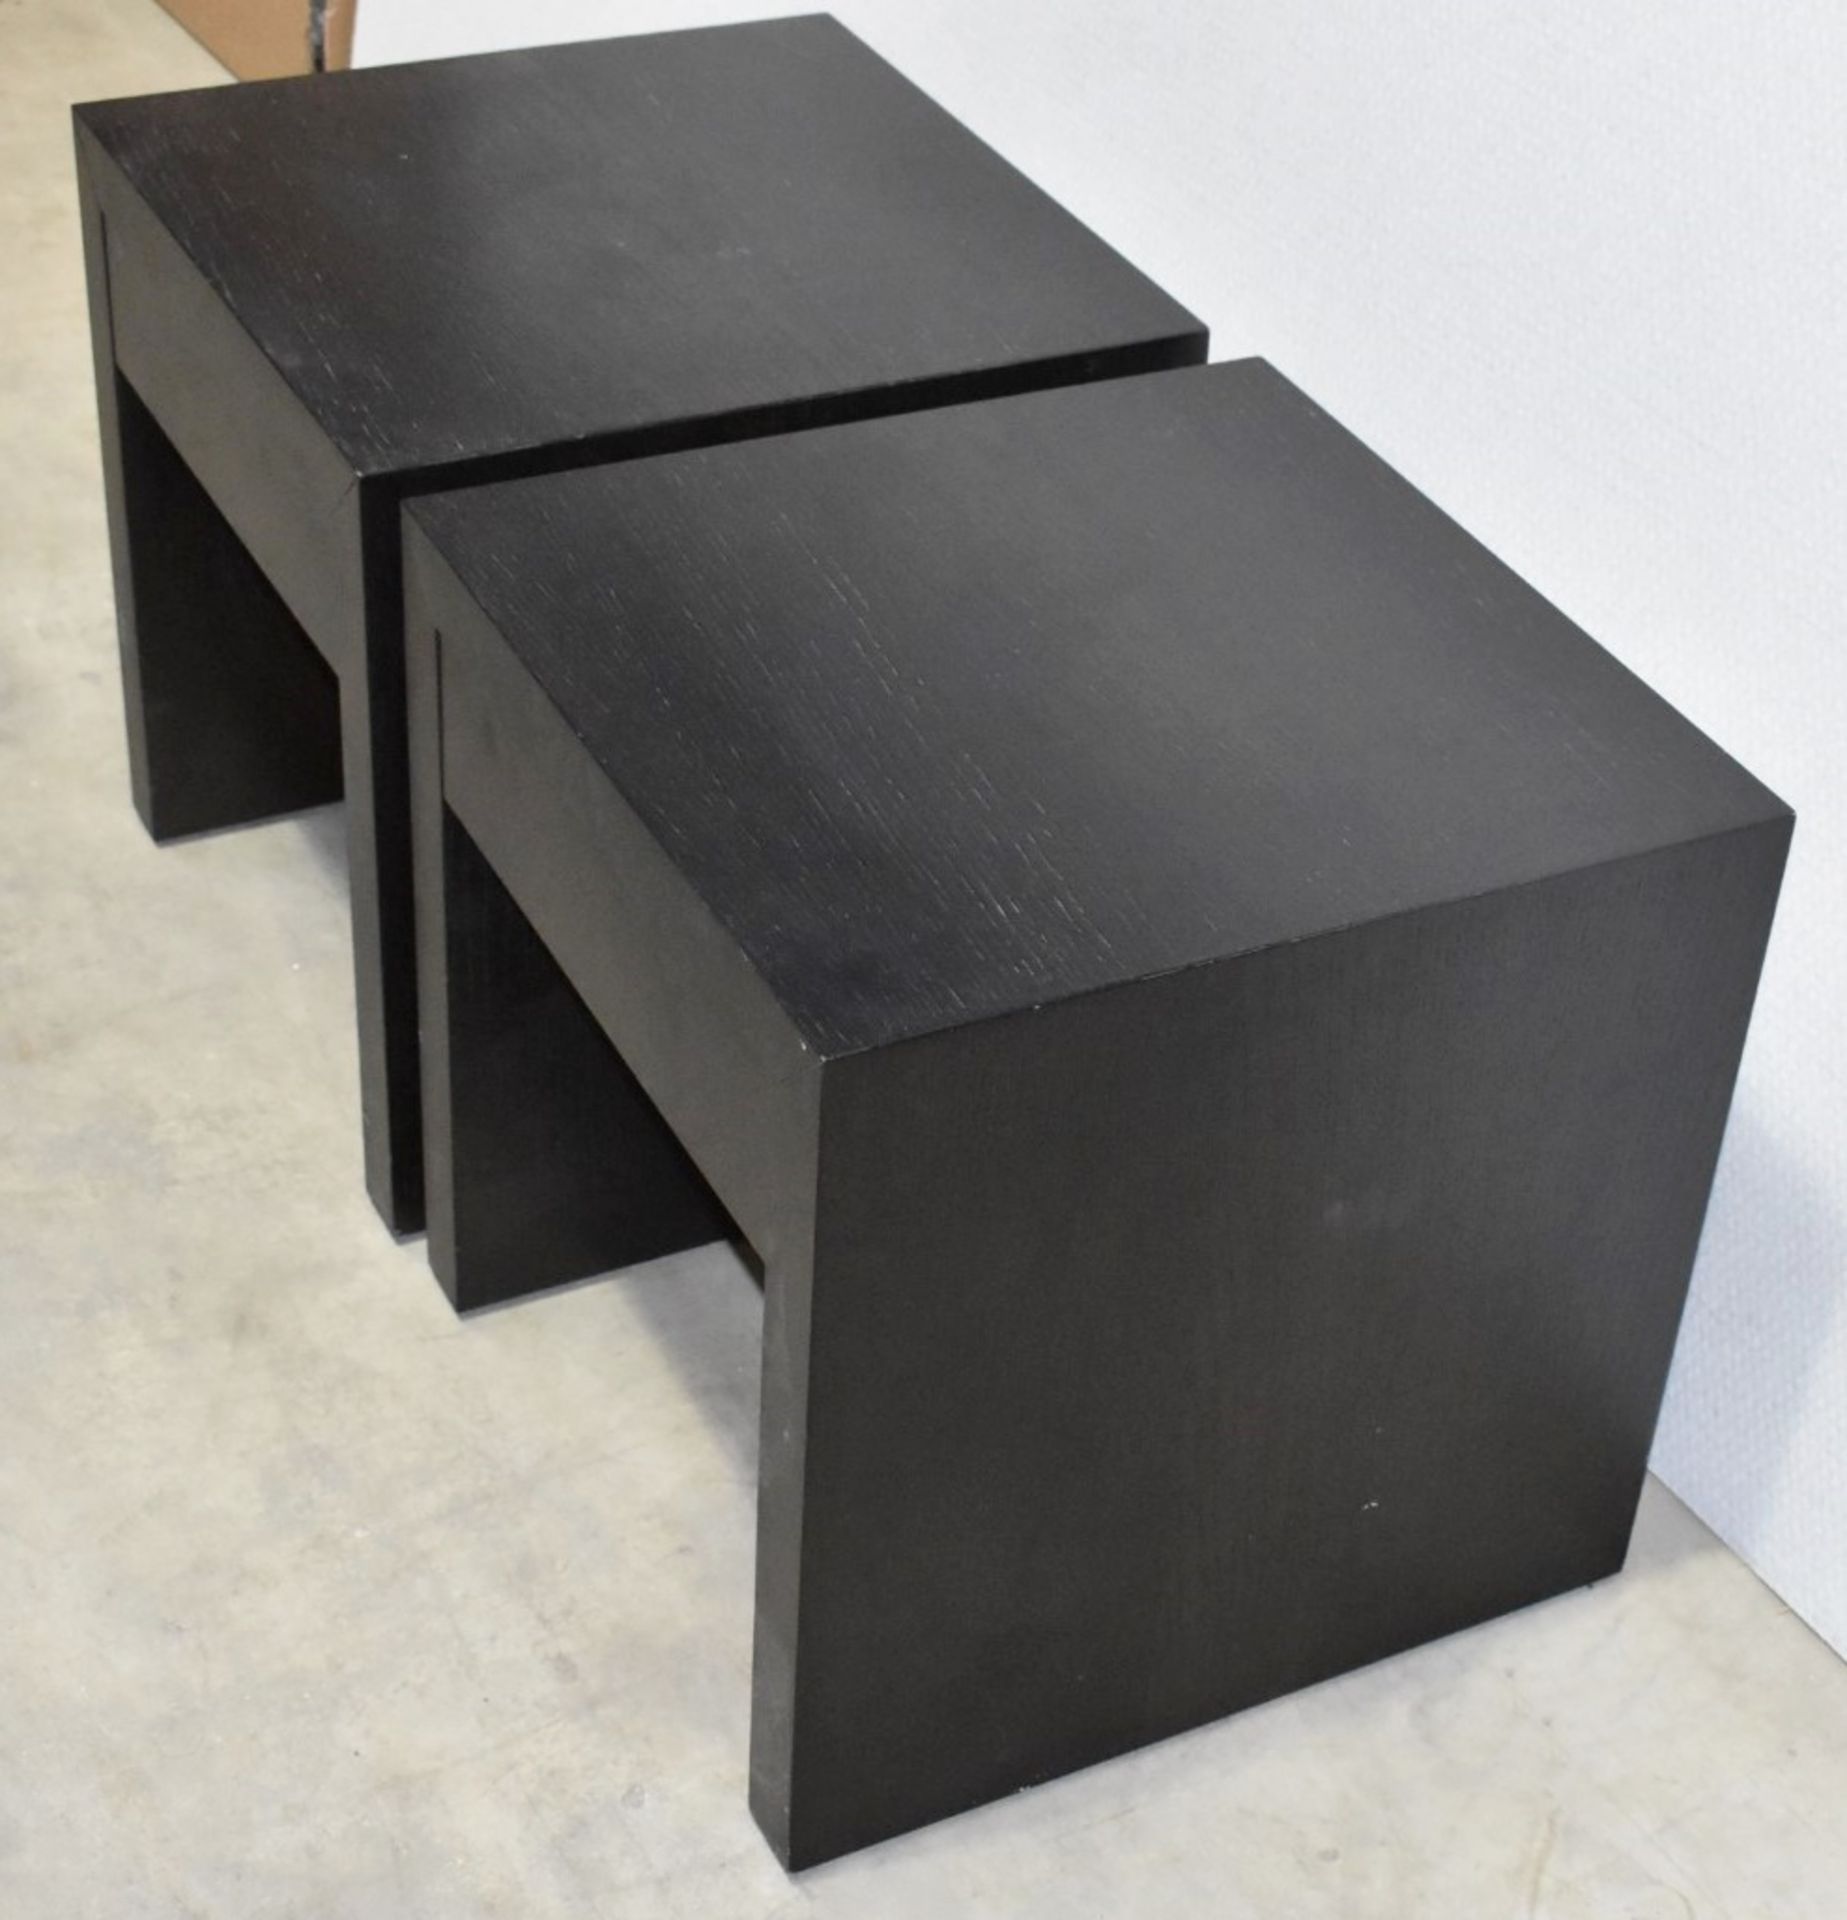 Pair of FENDI Modern Designer Wooden Bedside Cabinets Featuring Suede-style Lined 1-Drawer Storage - Image 7 of 15